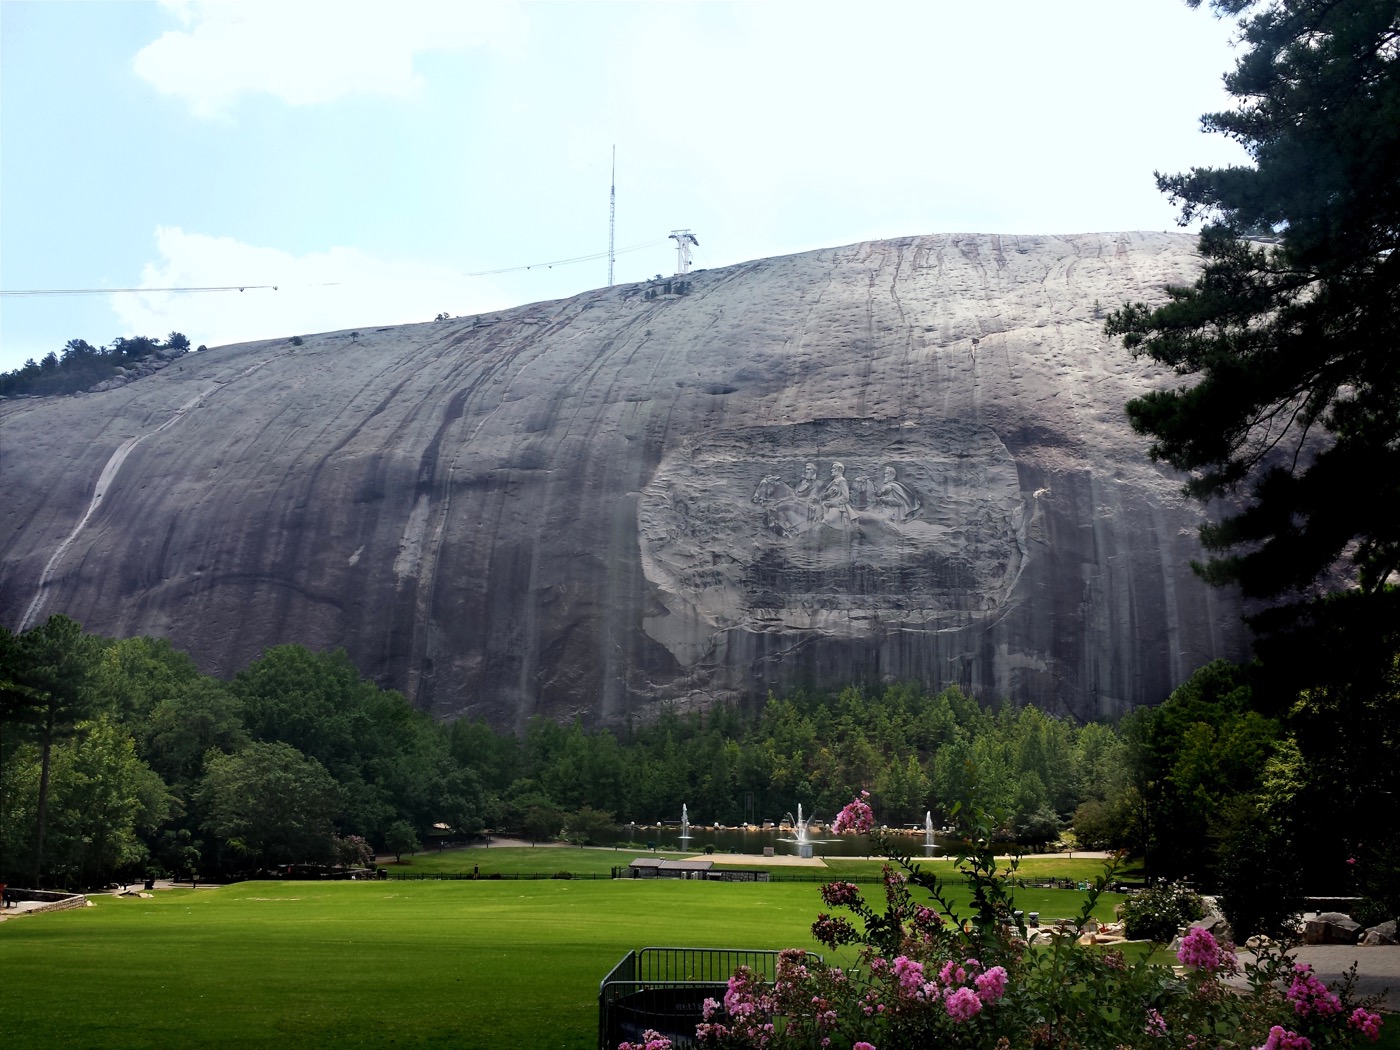 A mountain that resembles a large smooth stone, with a confederate memorial, soldiers and horses, carved into it